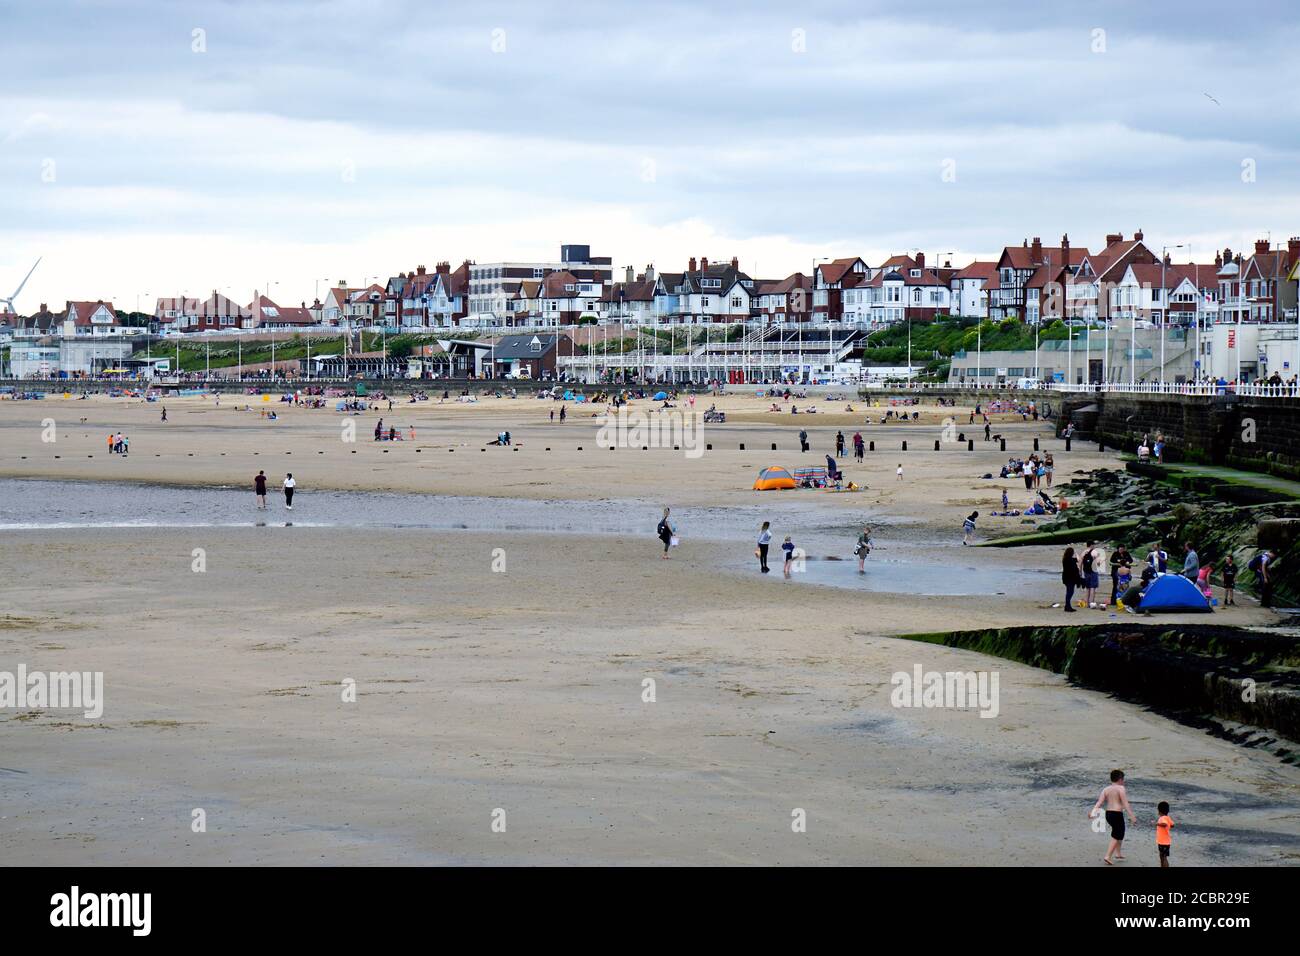 Bridlington, Yorkshire, UK. August 05, 2020.  Holidaymakers enjoying the South beach and seafront during low tide at Bridlington in Yorkshire, UK. Stock Photo